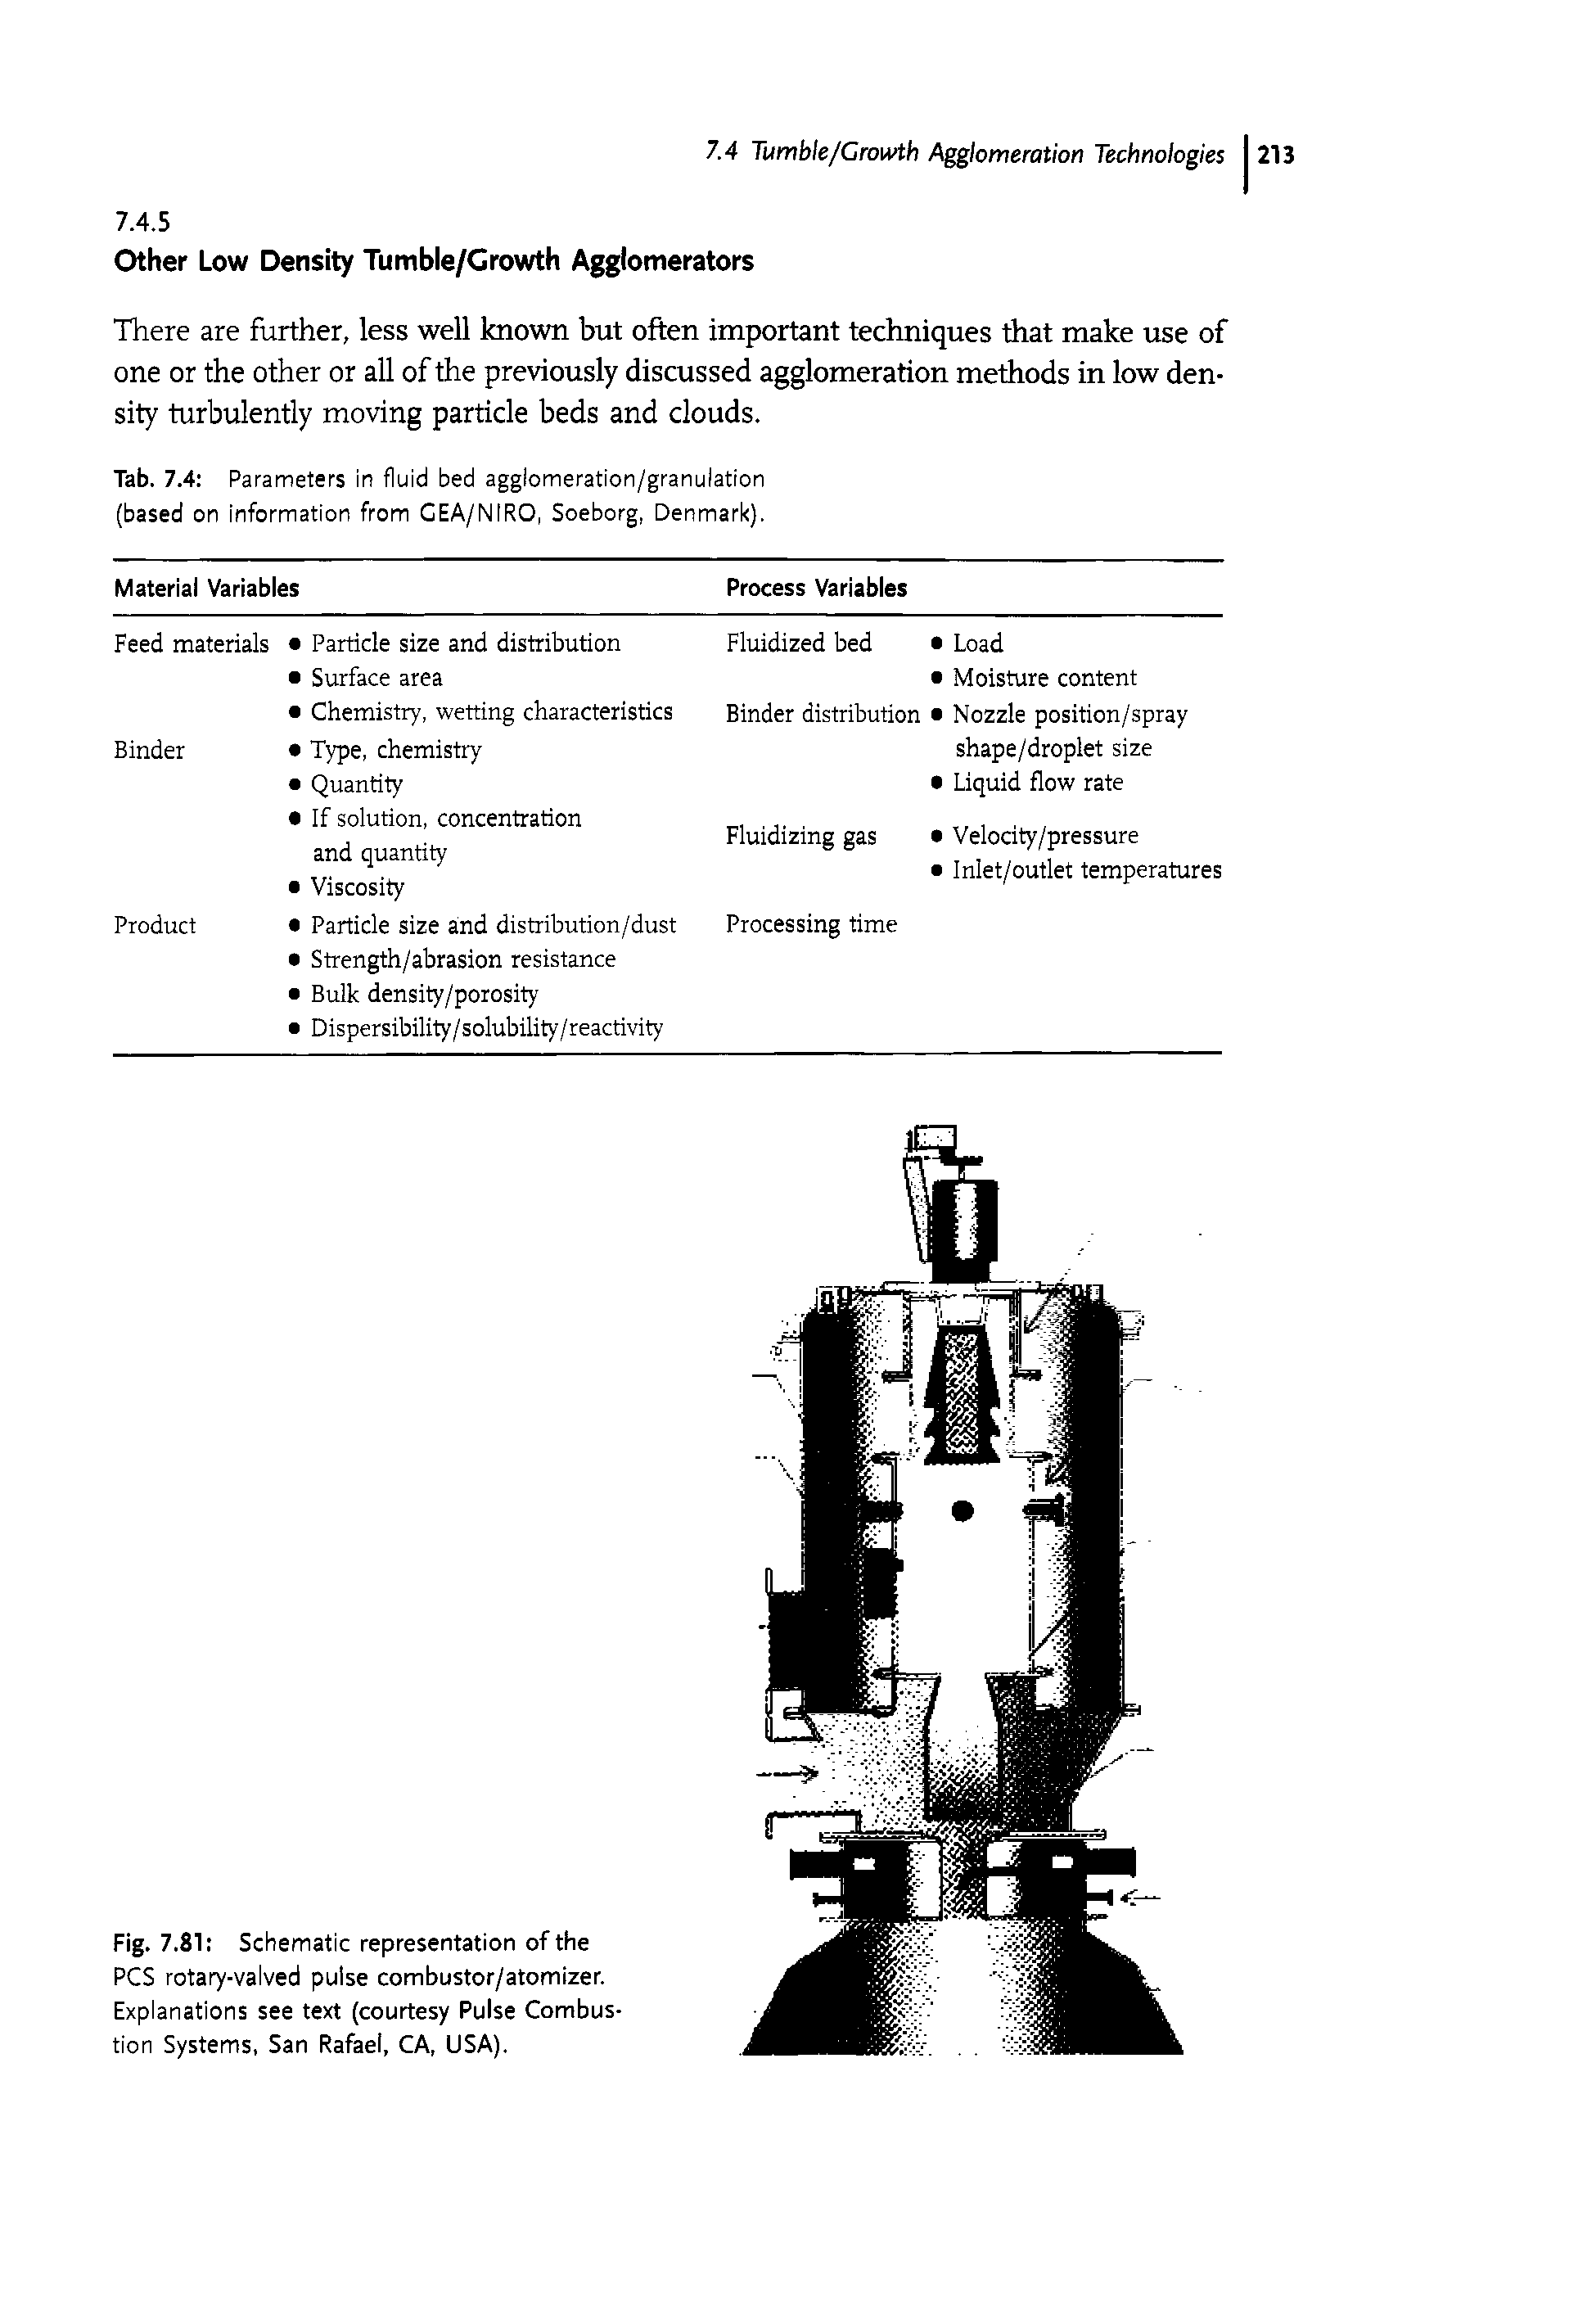 Fig. 7.81 Schematic representation of the PCS rotary-valved pulse combustor/atomizer. Expianations see text (courtesy Pulse Combustion Systems, San Rafael, CA, USA).